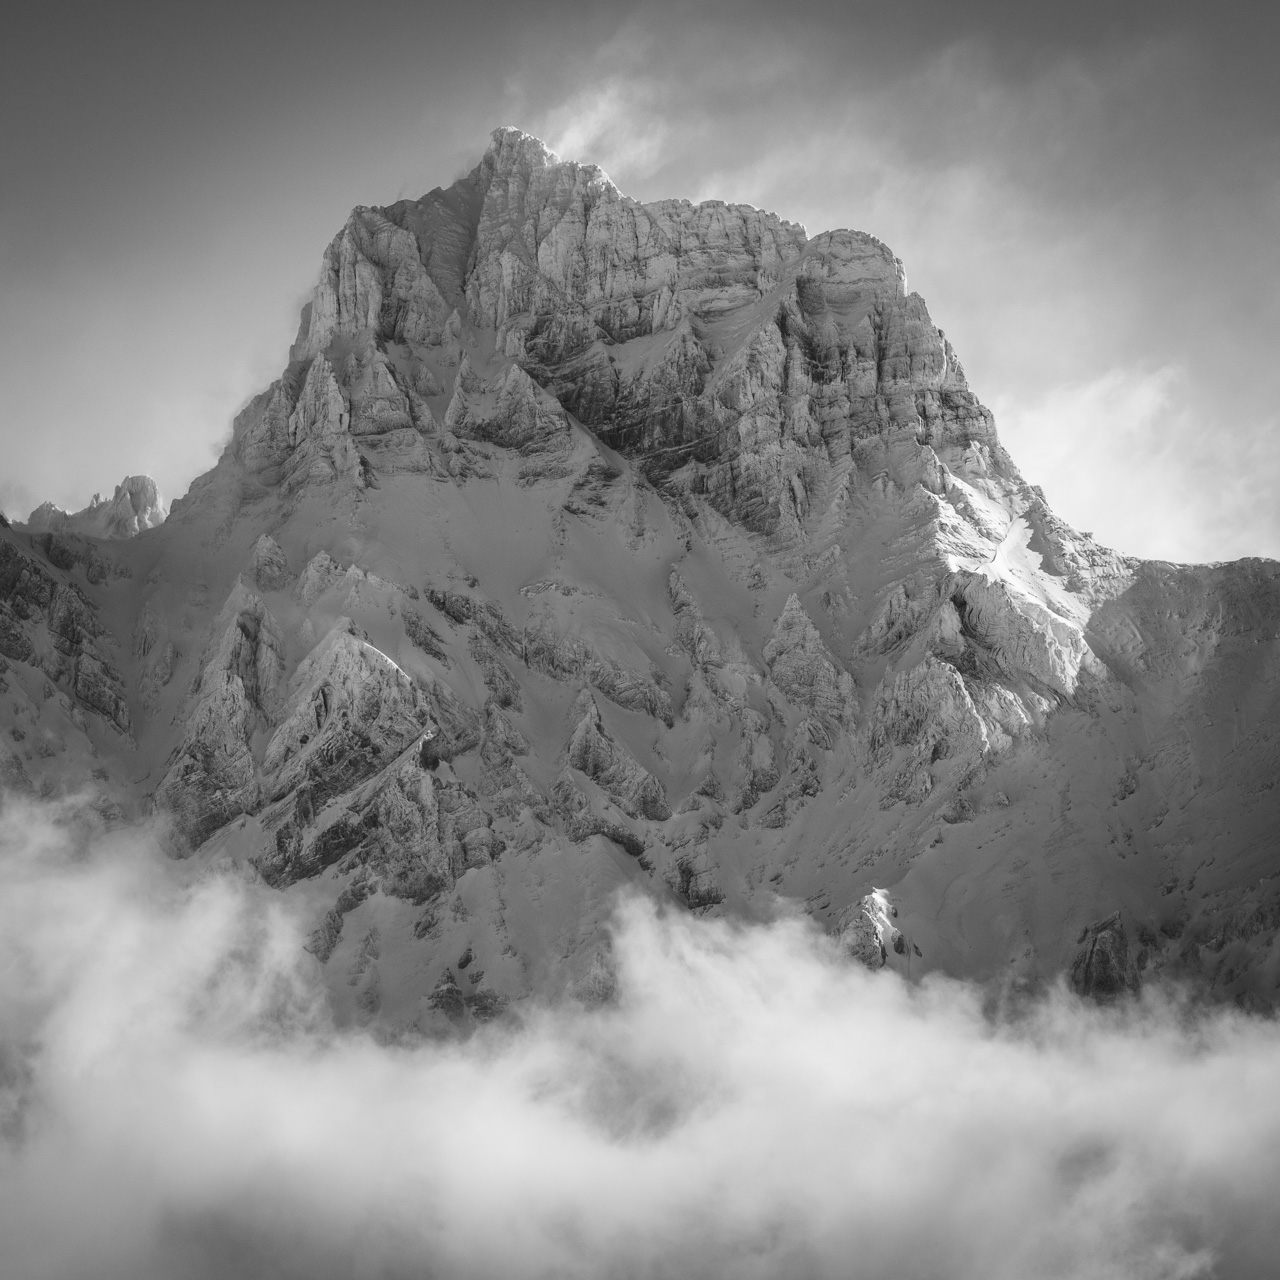 The Grand Muveran - Black and white mountain image after a winter snowstorm - Villars-sur-Ollon